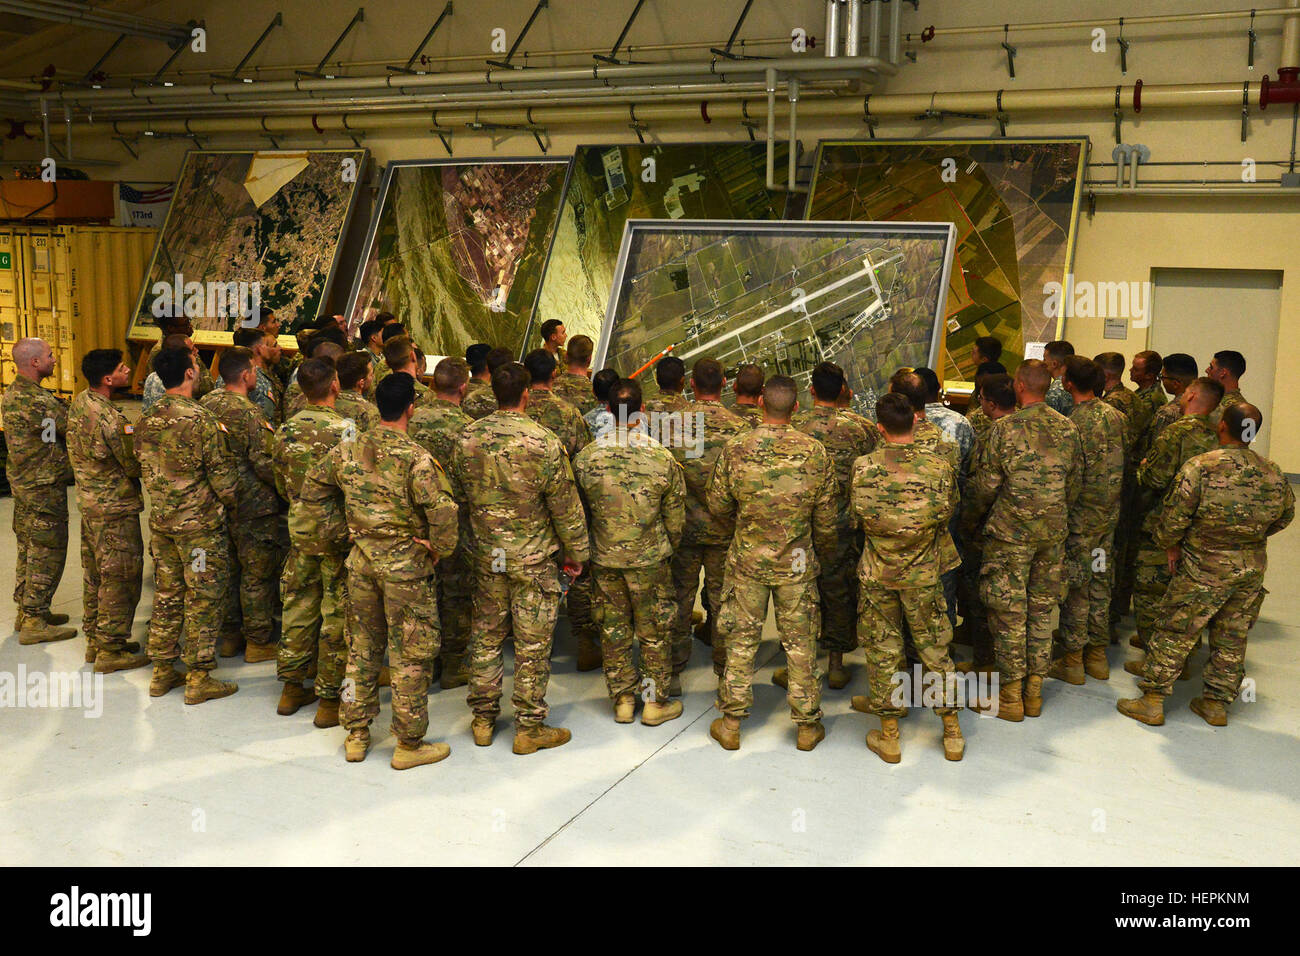 U.S. paratroopers assigned to the 2nd Battalion, 503rd Infantry Regiment, 173rd Airborne Brigade, review drop zone area map at Aviano Air Base, for an airborne operation on Rivolto Air Base, Italy, Oct. 28, 2015. The 173rd Airborne Brigade is the Army Contingency Response Force in Europe, capable of projecting ready forces anywhere in the U.S. European, Africa or Central Commands areas of responsibility within 18 hours. (U.S. Army photo by Visual Information Specialist Paolo Bovo/Released) Airborne Operation at Rivolto Air Base, Italy 151028-A-JM436-077 Stock Photo